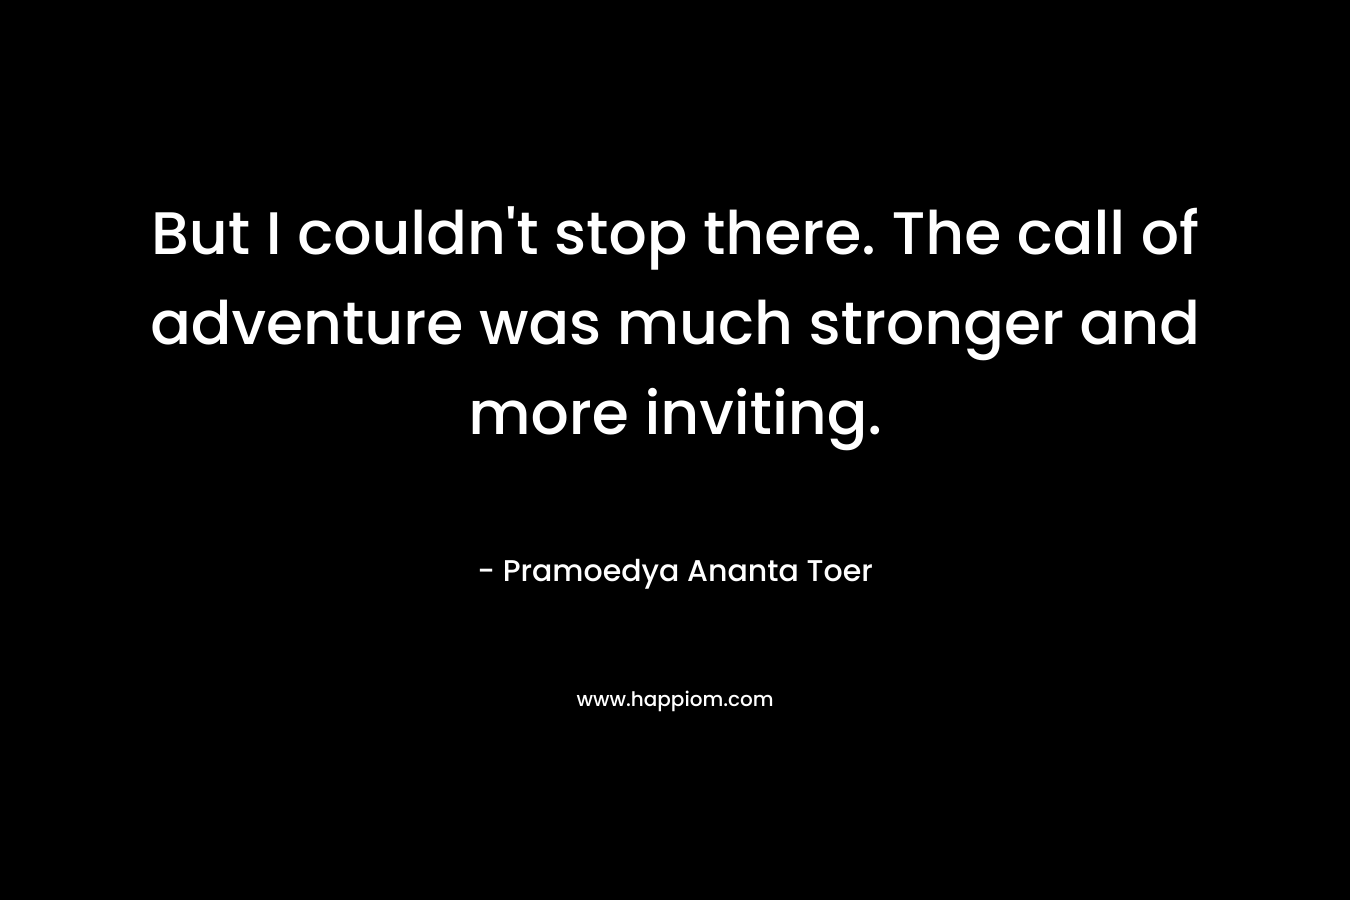 But I couldn’t stop there. The call of adventure was much stronger and more inviting. – Pramoedya Ananta Toer